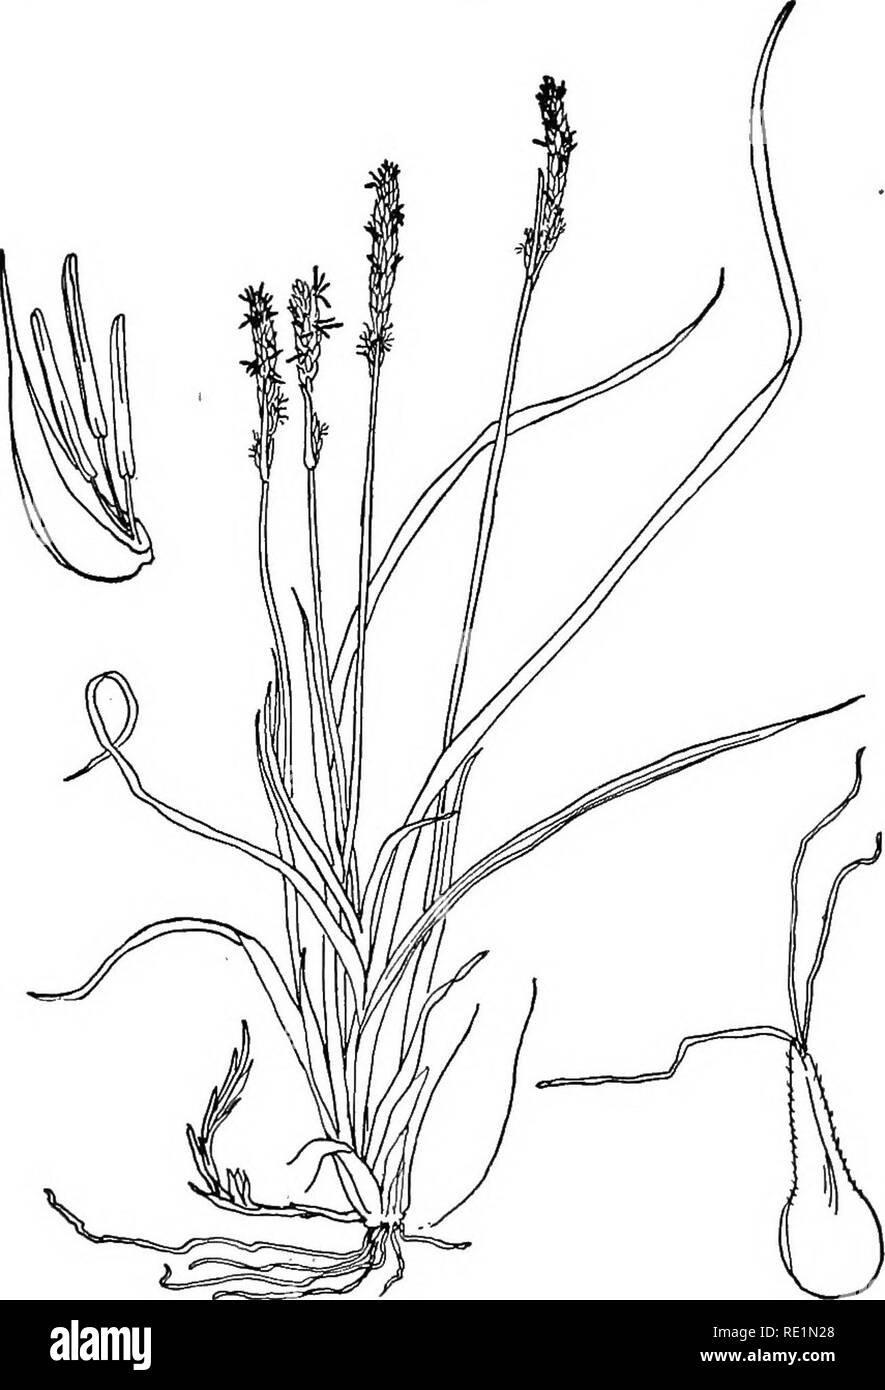 . College botany; structure, physiology and economics of plants. Botany. 324 COLLEGE BOTANY There are a great many other grasses, many of which are of great agricultural value. Among the most important are timothy Thleum praiense), the orchard grass (Dactylis glomerata) and. Fig. 164.—Cyperacese the blue grass {Pow pratensis). There are also many grasses which are great annoyances to the farmer and may be classed as weeds (Fig. 163). Cypeeaceje (Sedge Family).-—Herbs which are grass-like or rush-like in character; stems usually solid; leaves three-. Please note that these images are extracted  Stock Photo